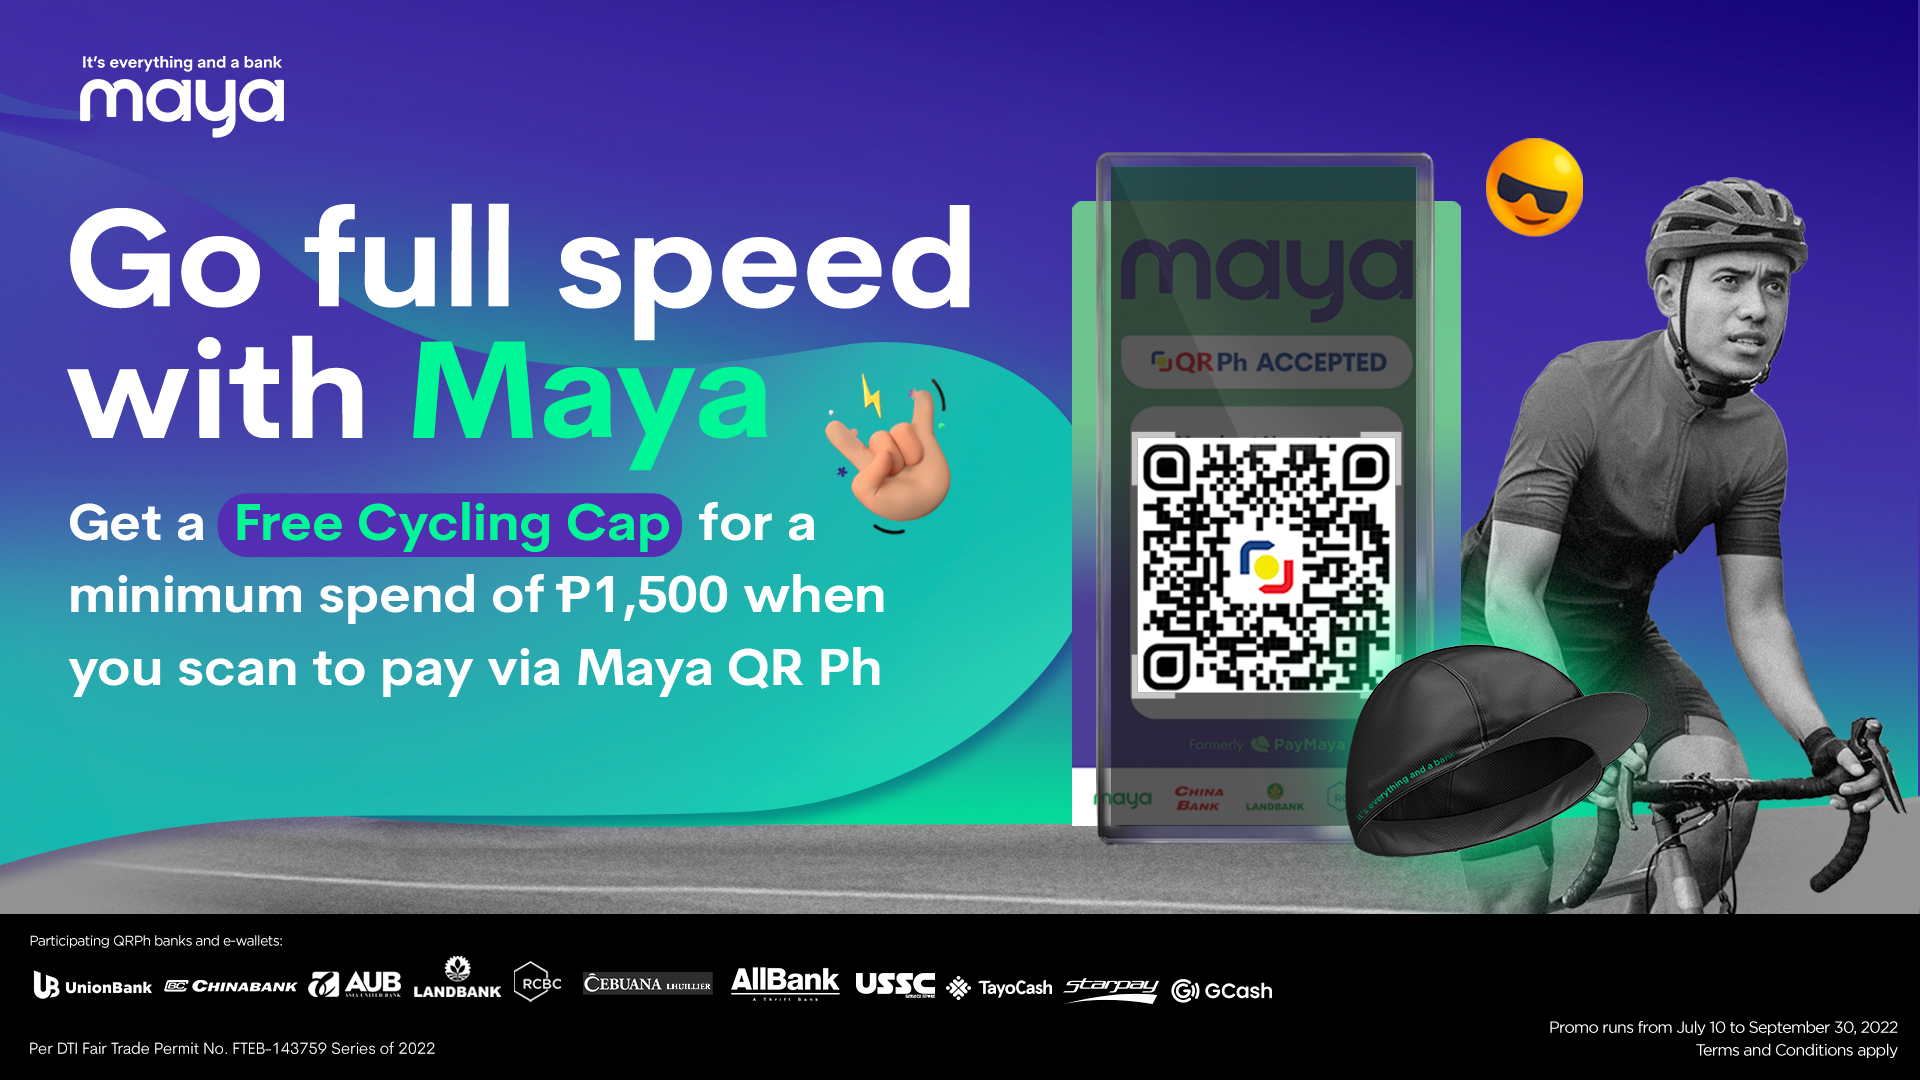 Gear up with a free cycling cap when you pay via Maya QR Ph!